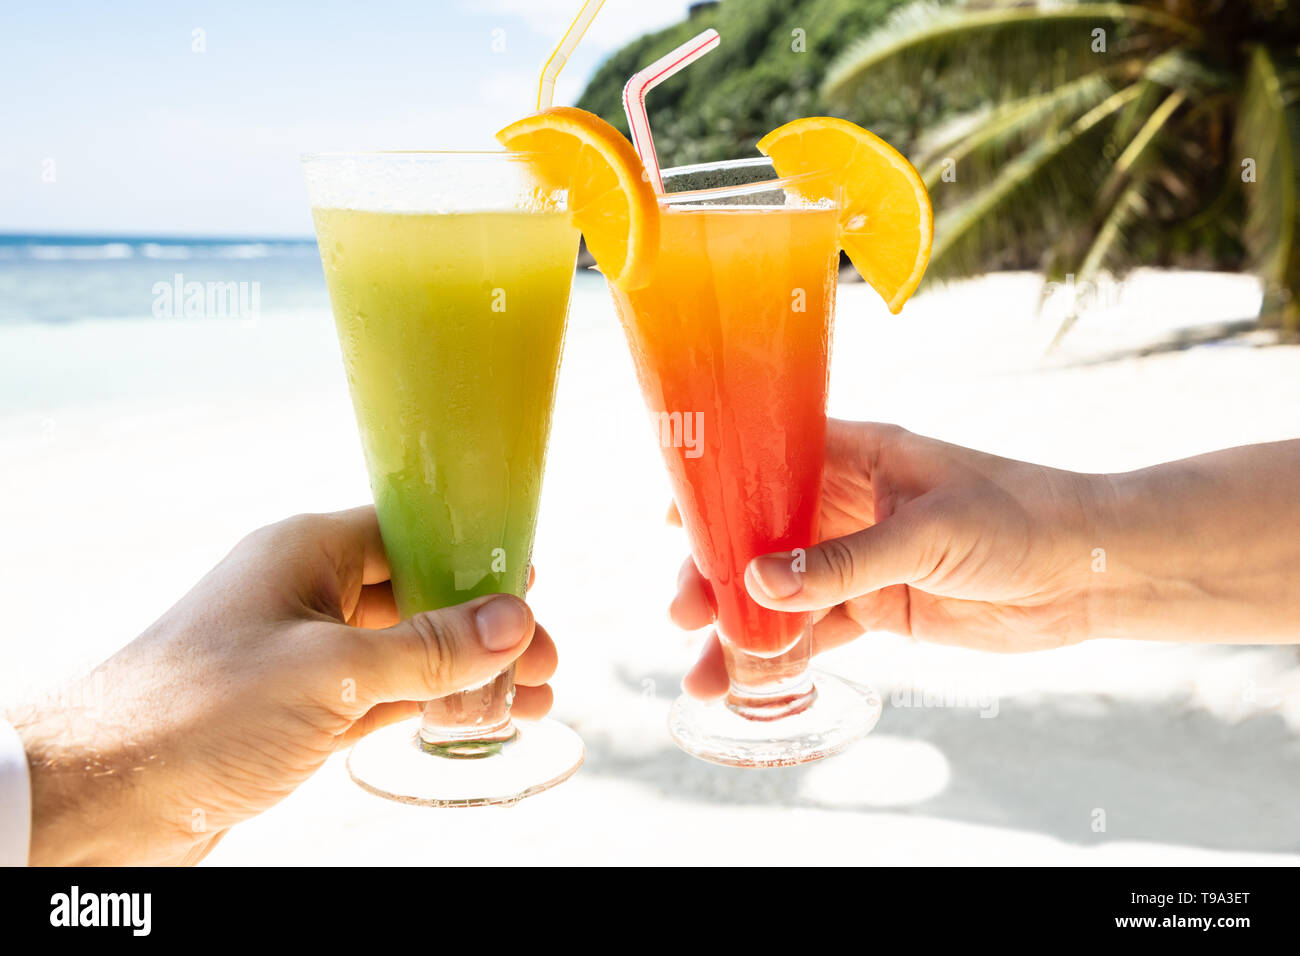 https://c8.alamy.com/comp/T9A3ET/close-up-of-couples-hand-toasting-the-glasses-of-cocktail-at-beach-during-summer-T9A3ET.jpg